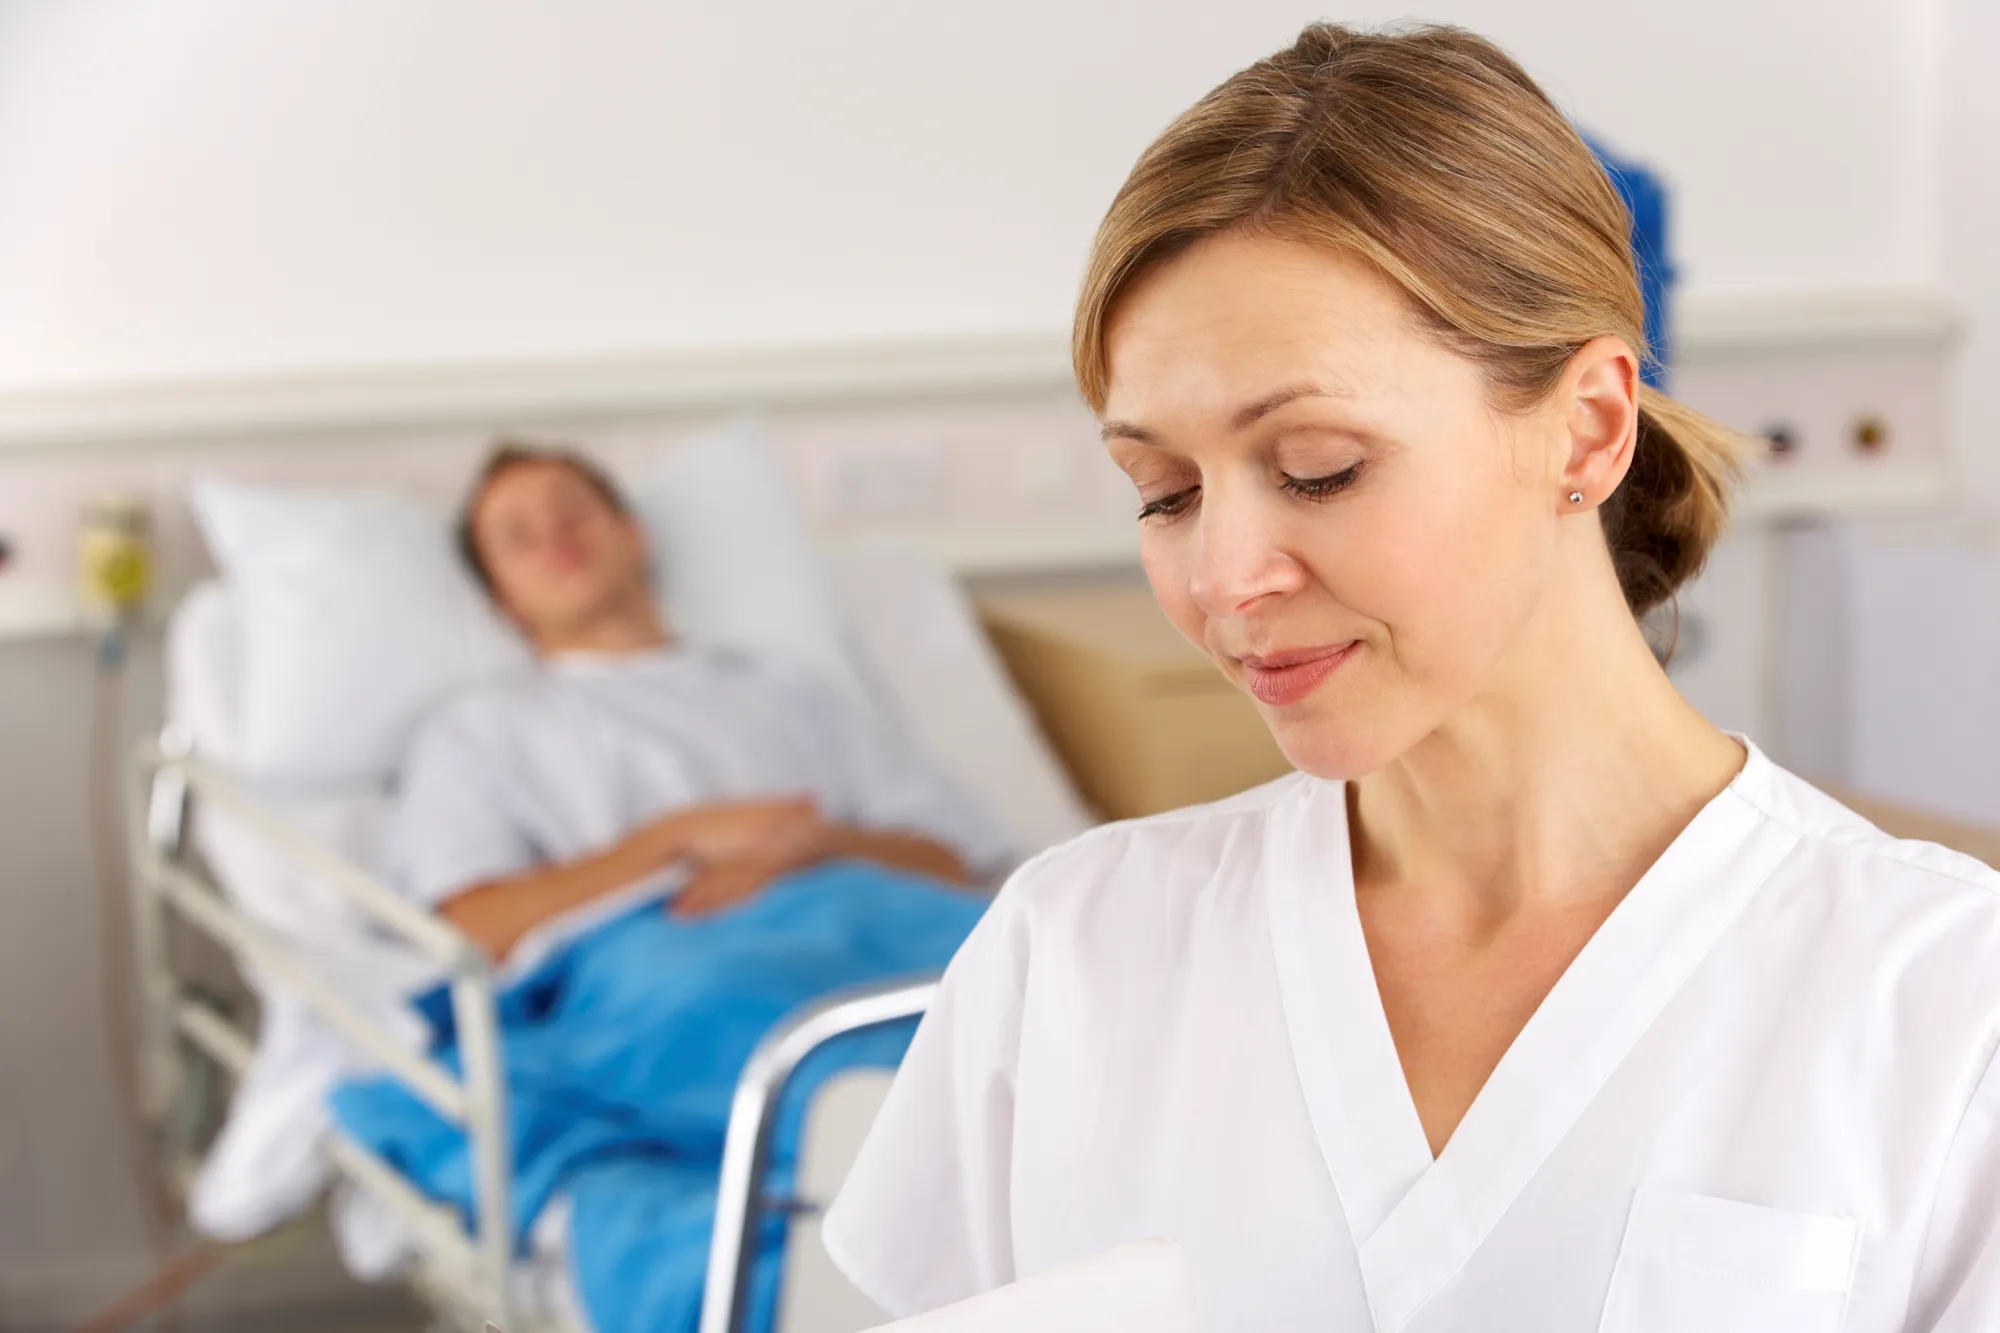 Image of Doctor at hospital with patient